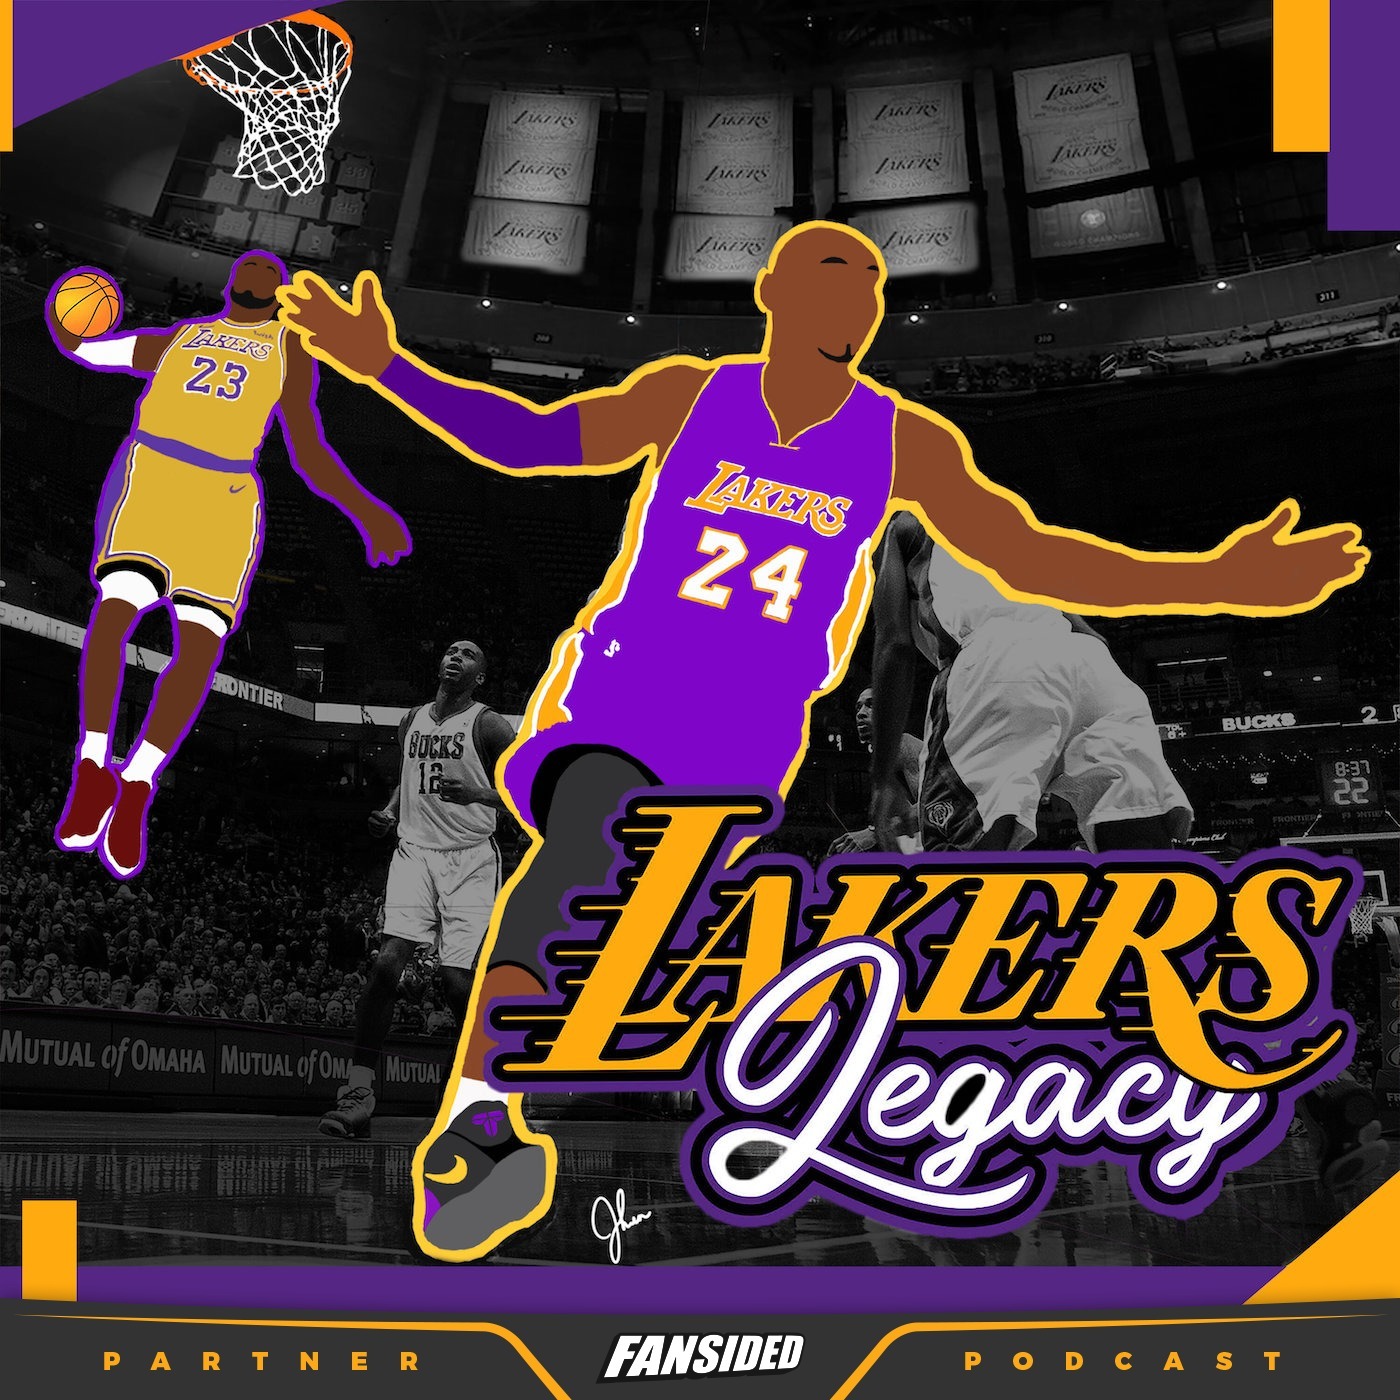 Report: Lakers reveal full schedule for 2021-22 season - Lakers Daily